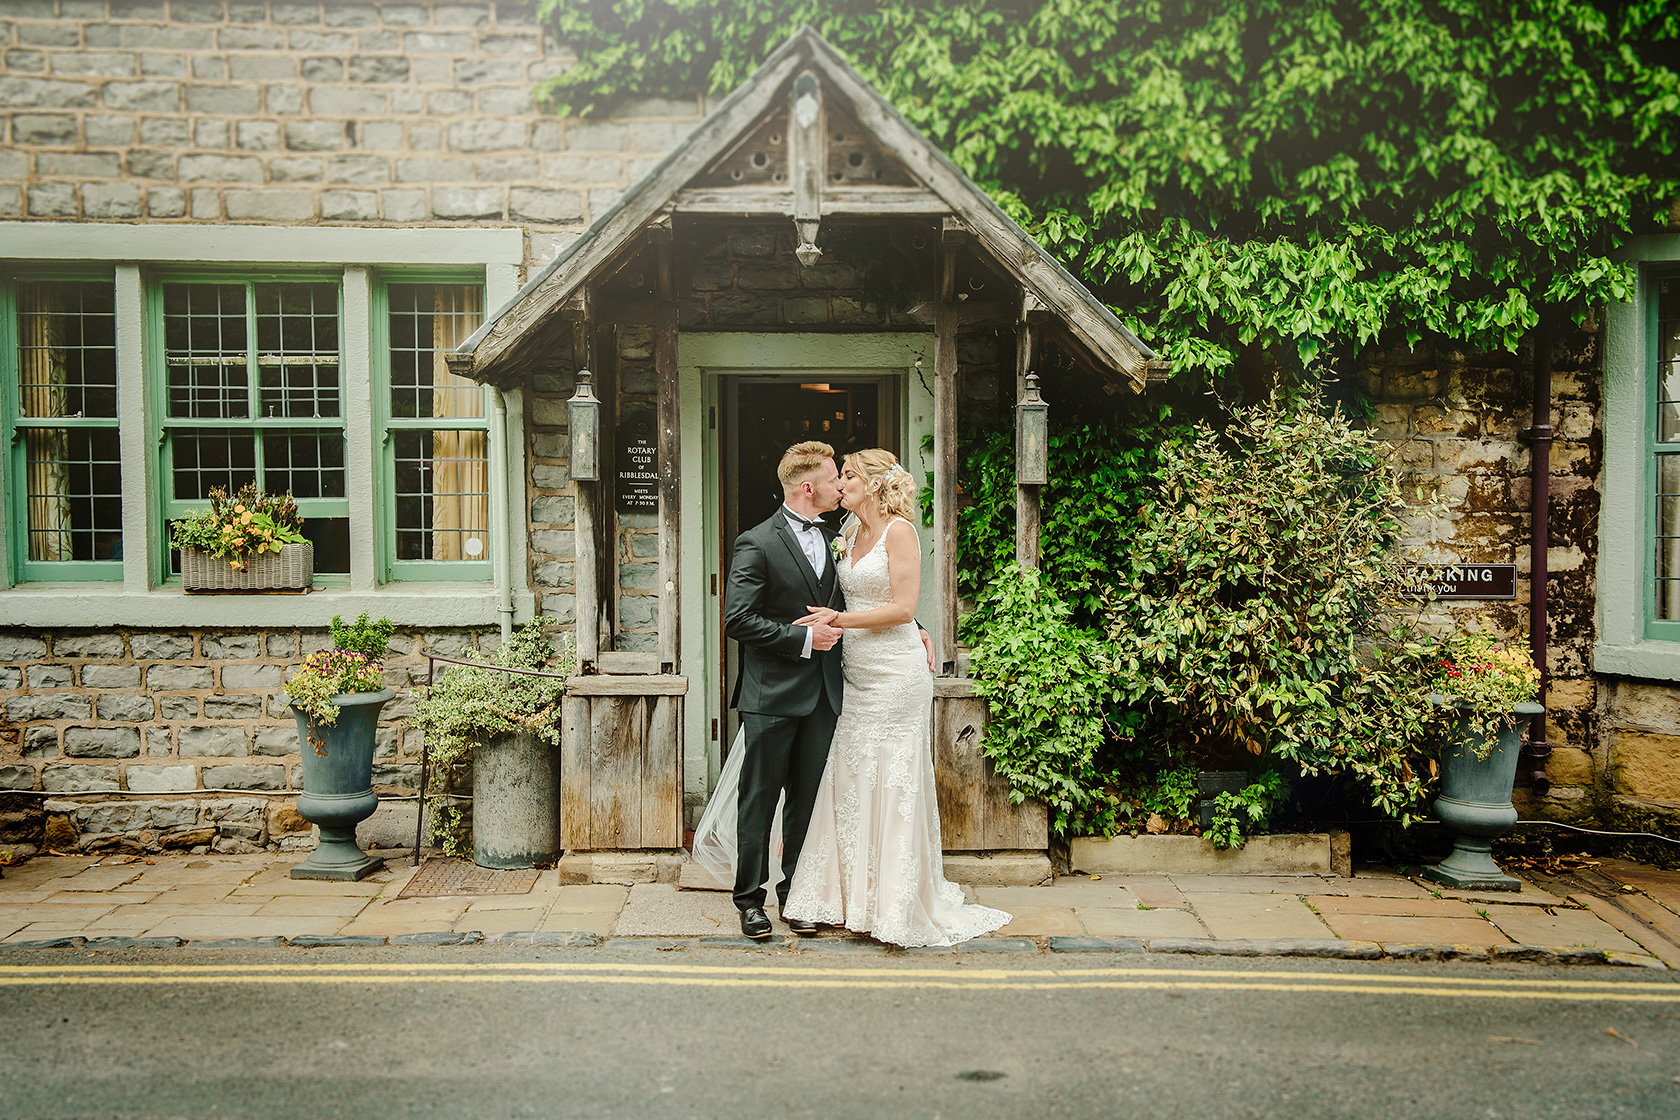 Last minute wedding venues near Clitheroe in the Ribble Valley